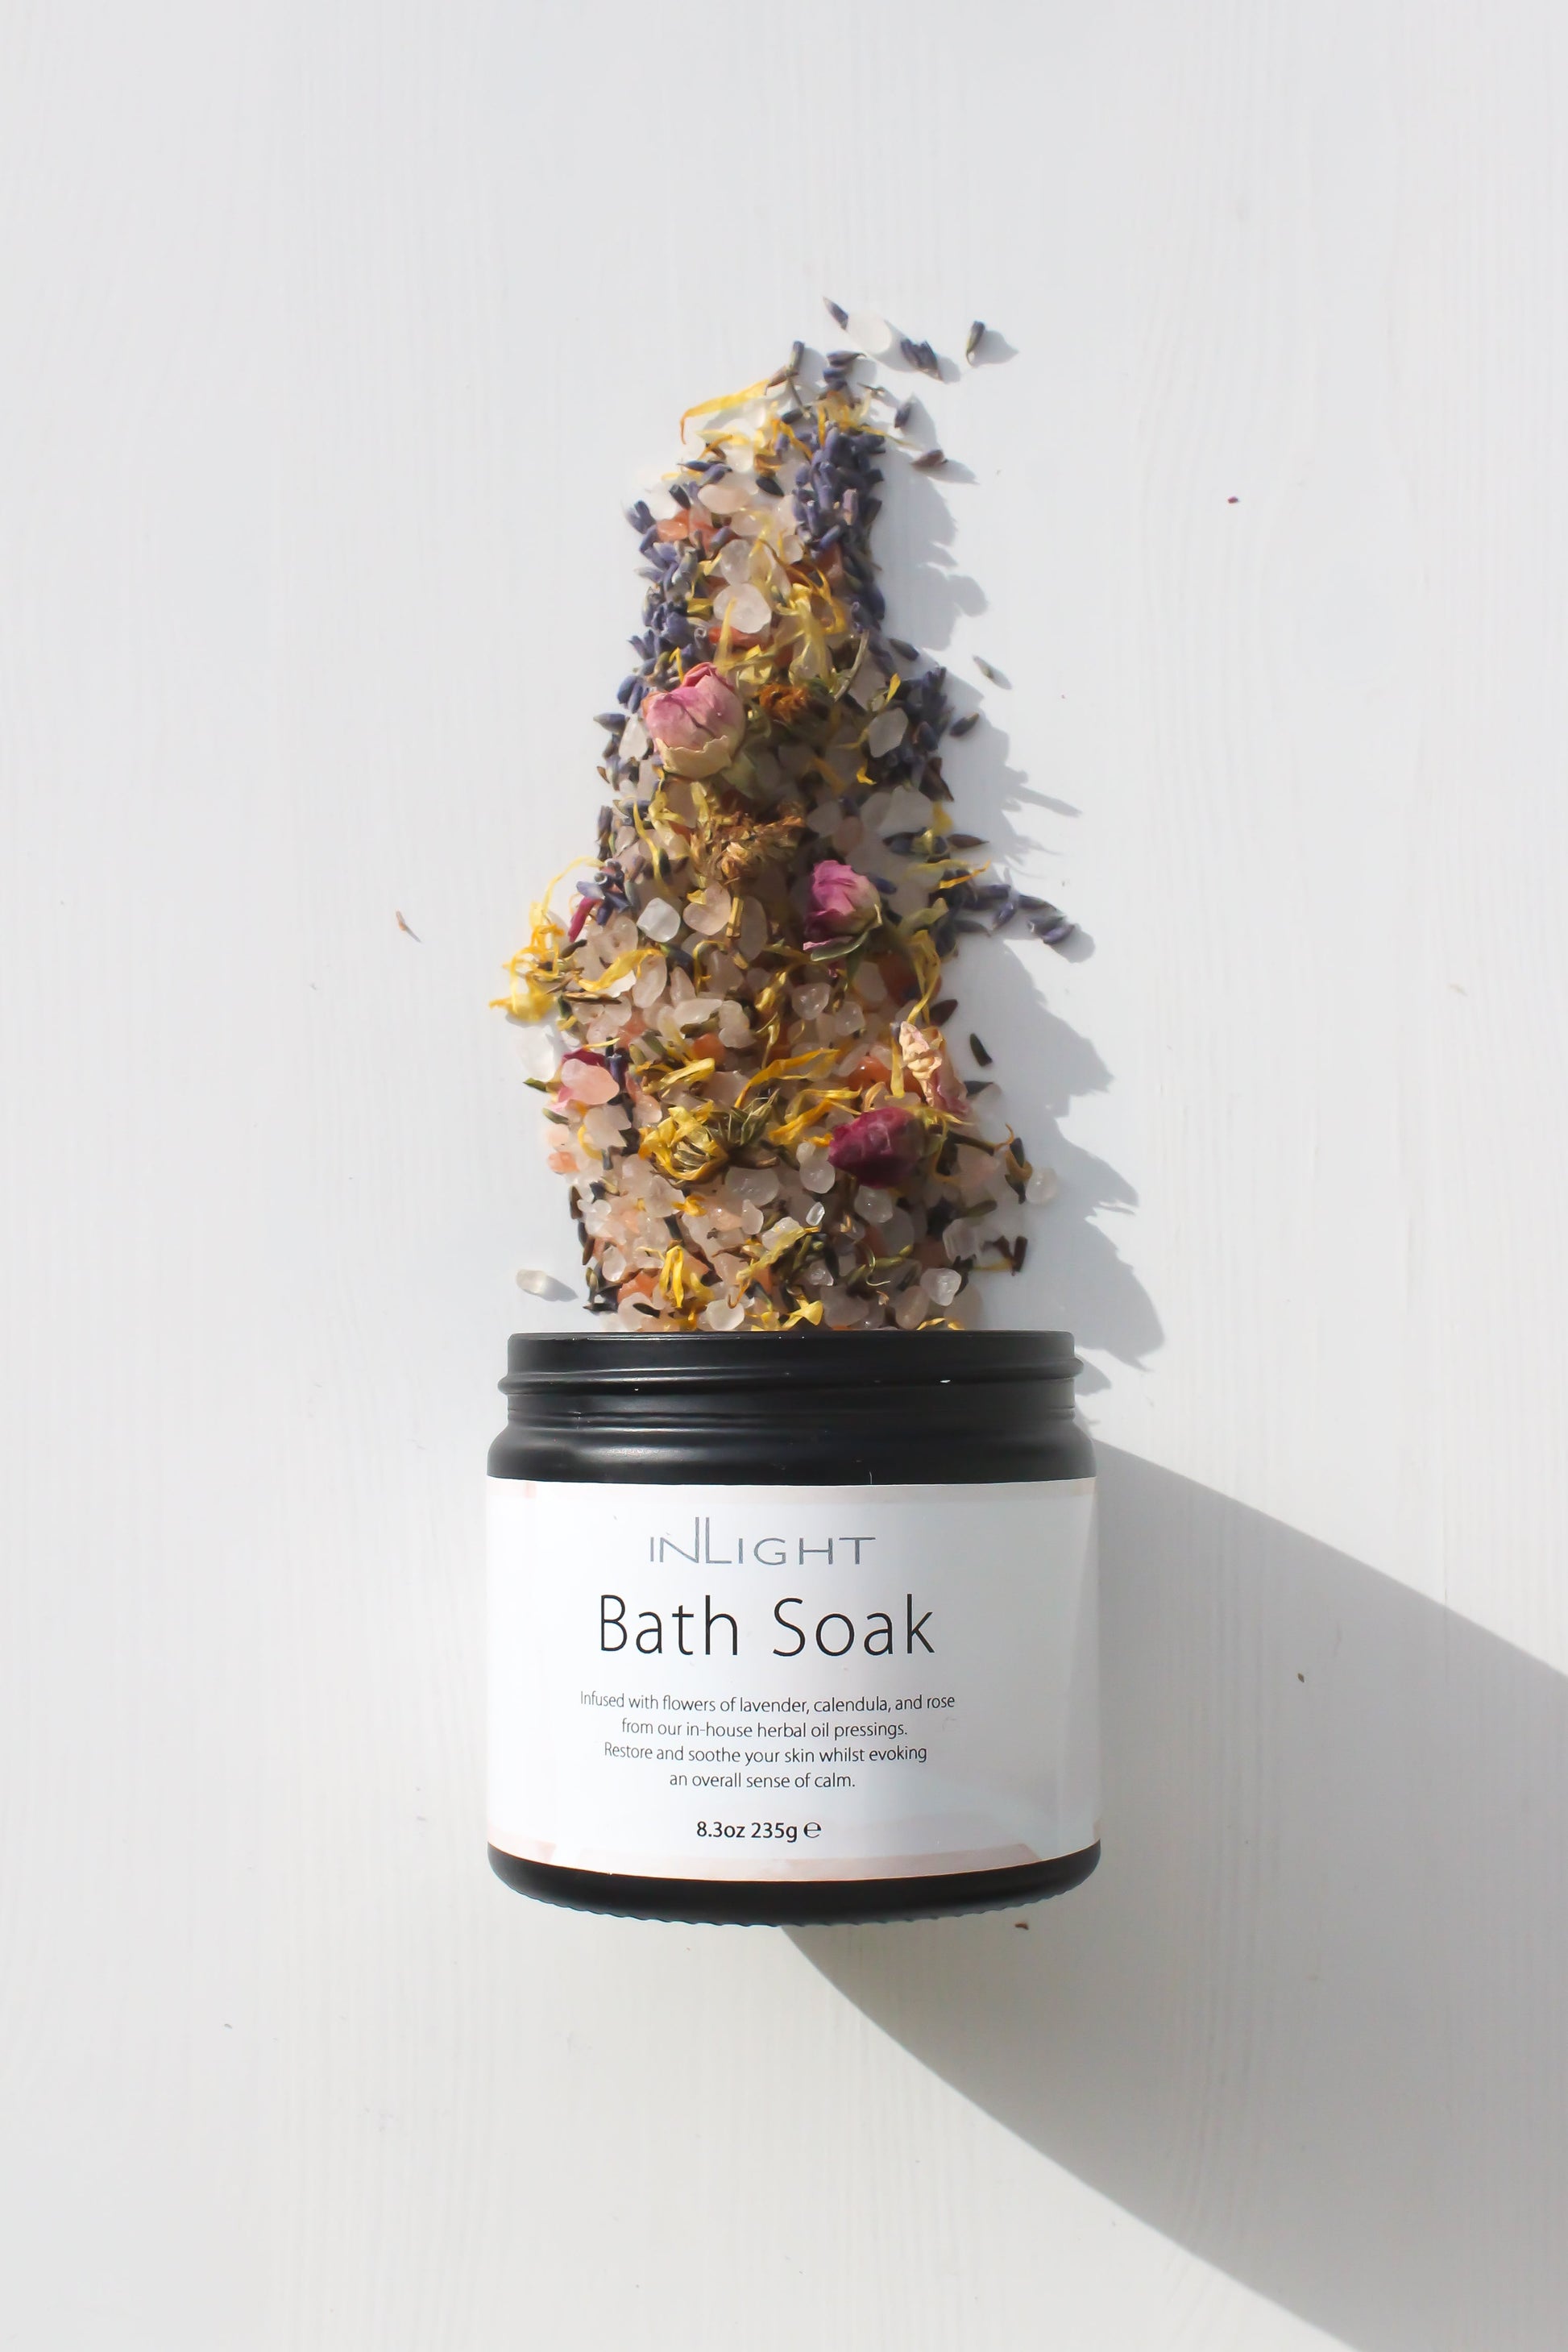 image of inlight beauty bath salts jar laying flat and opened with a spray of the salts and herbs and flowers spilled out of the jar on to the white/grey background